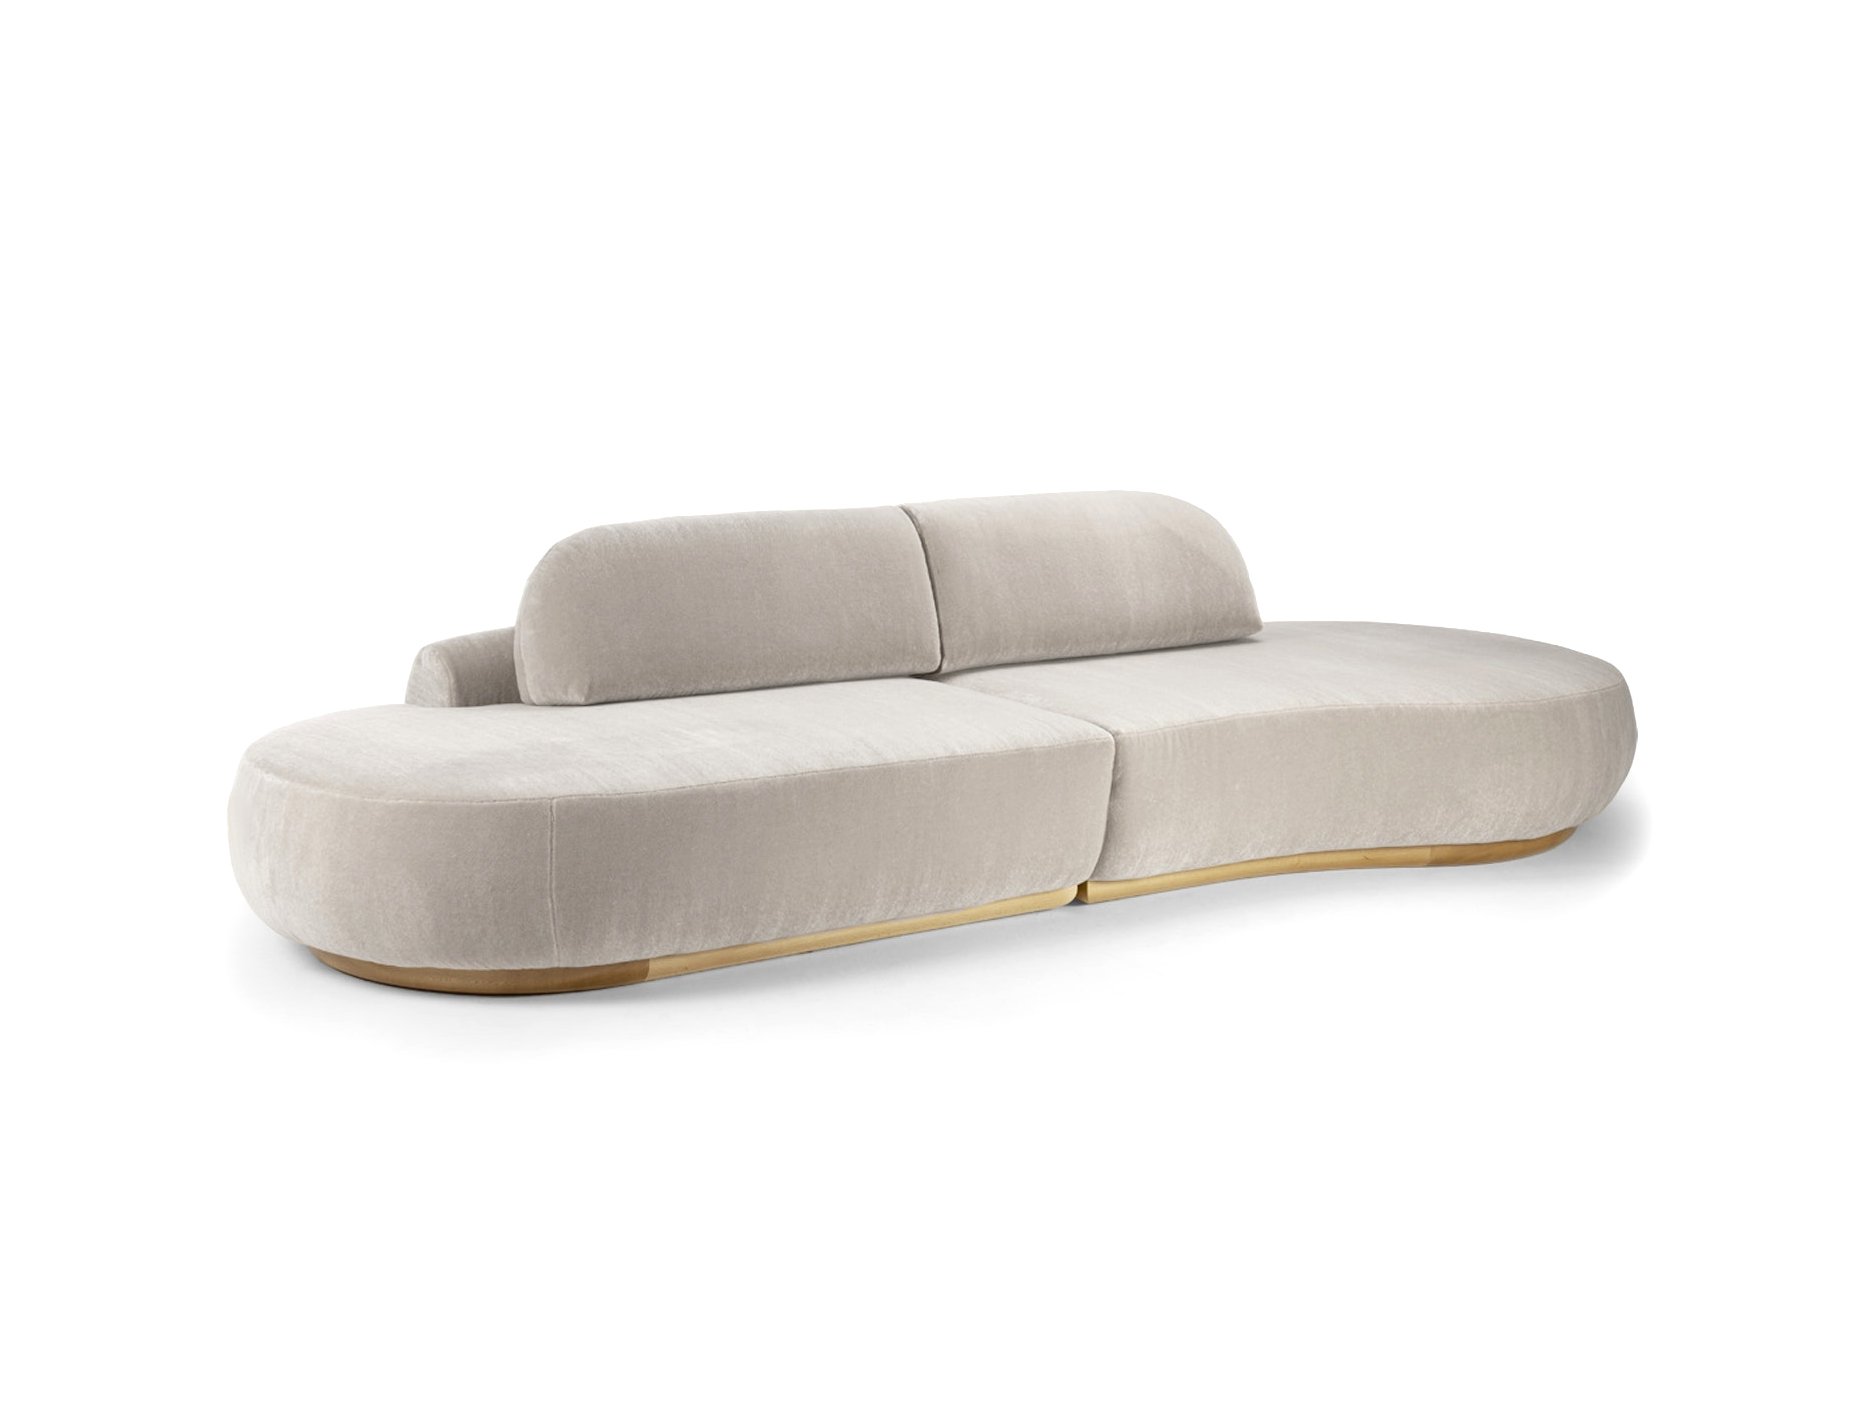 Hooker Furniture Larrabee Curved Sectional, Cream, Living Room Seating Sectional Sofas